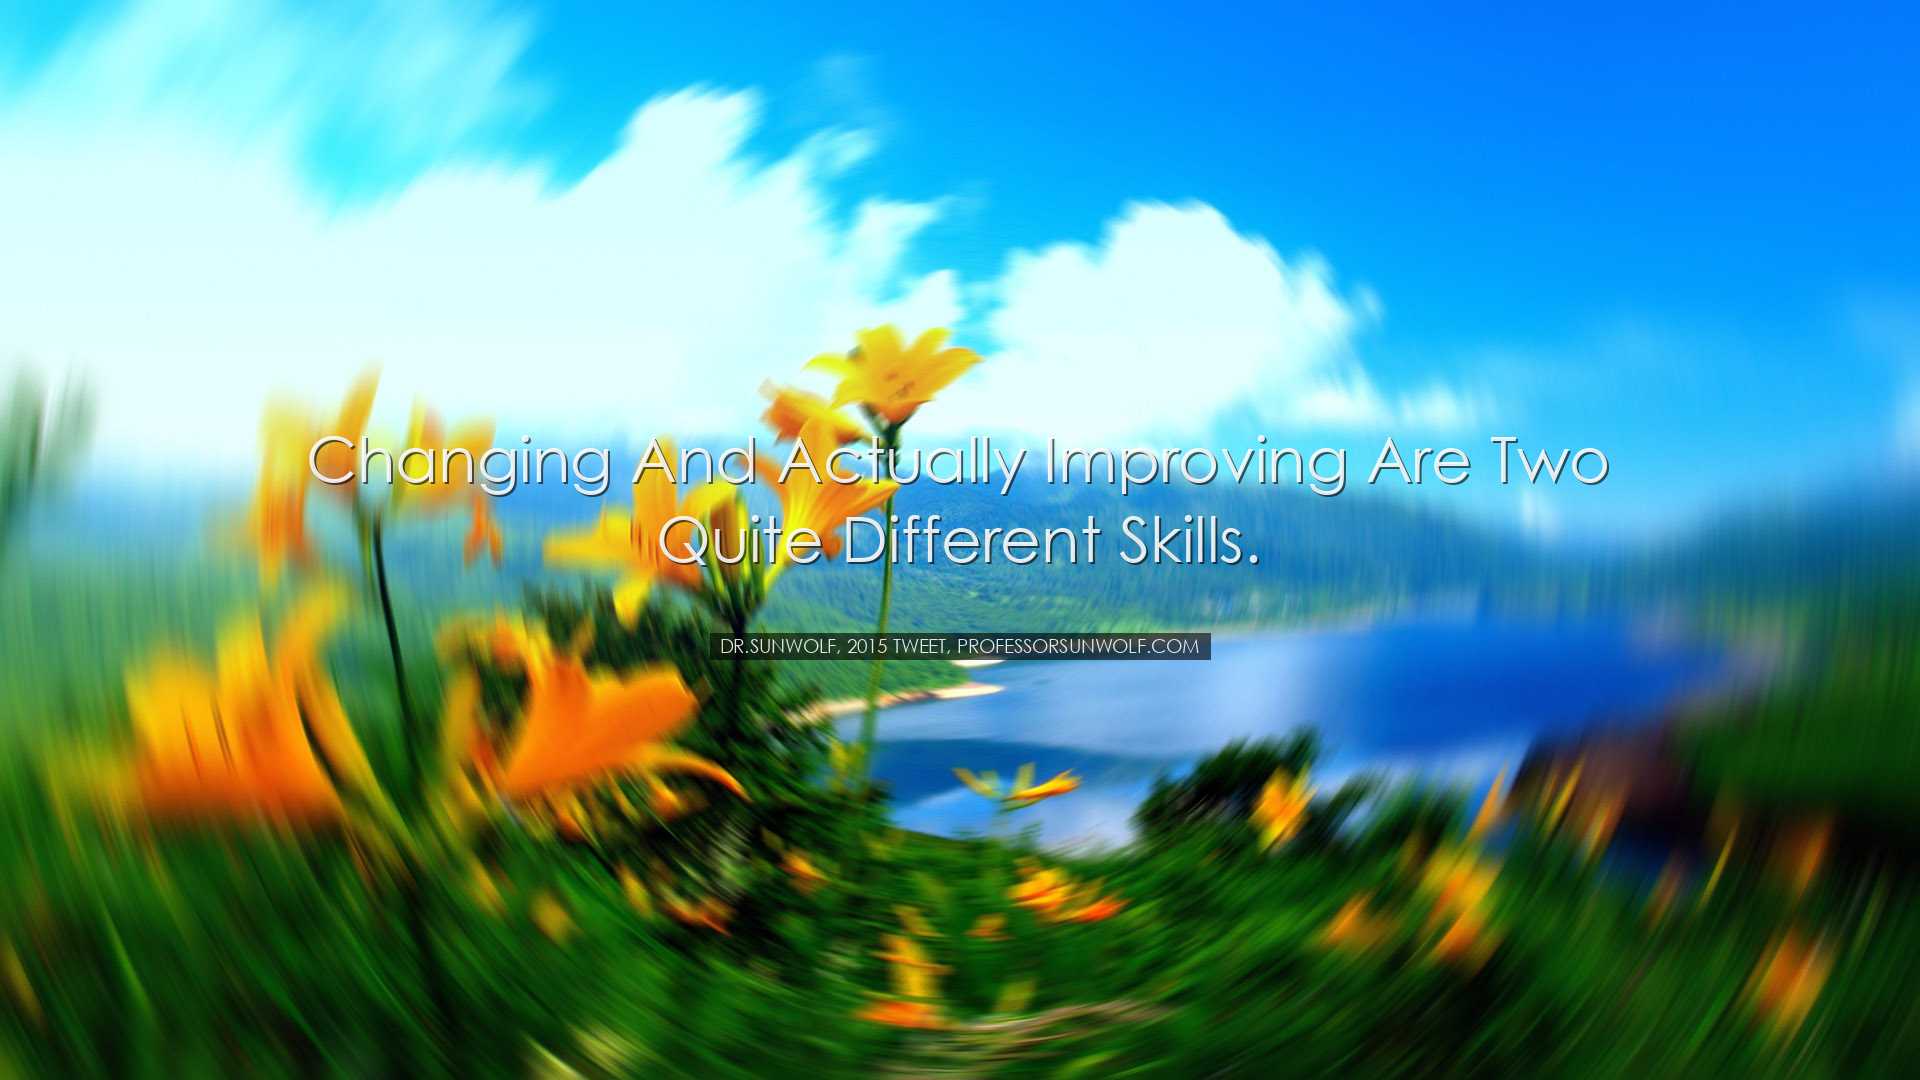 Changing and actually improving are two quite different skills. -